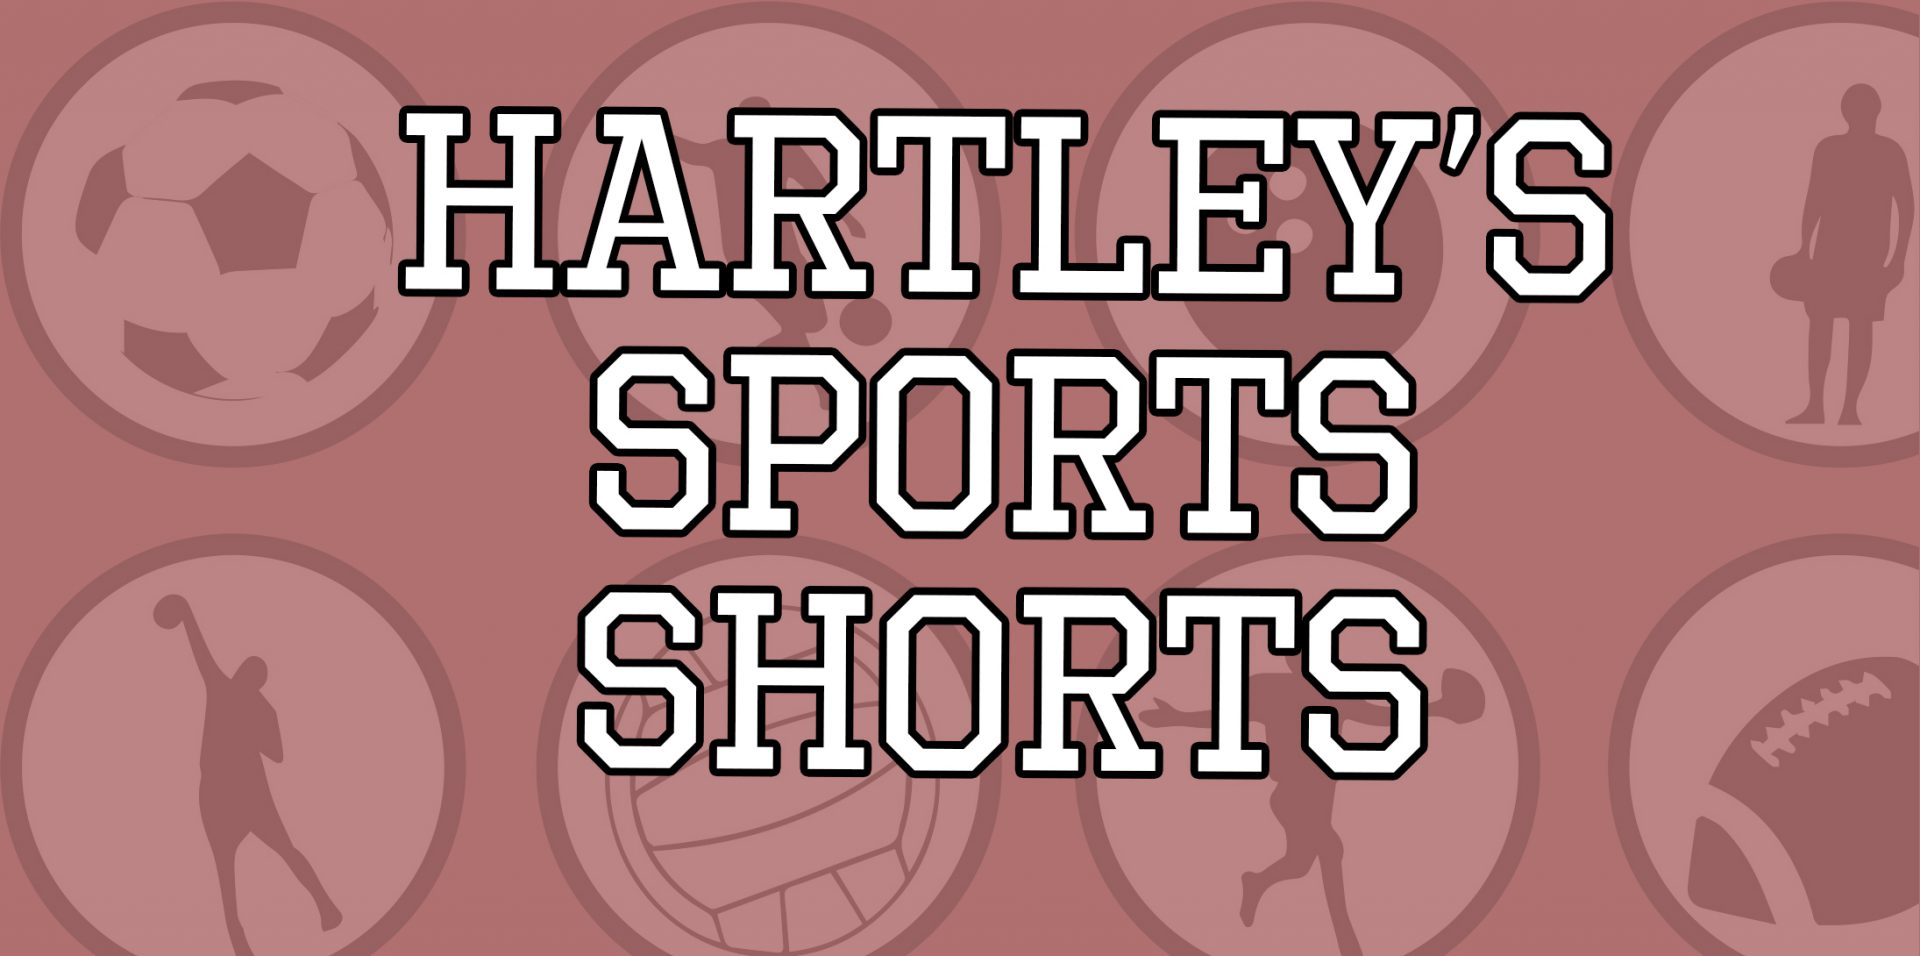 Hartley sports pants.  Tuesday 31 August